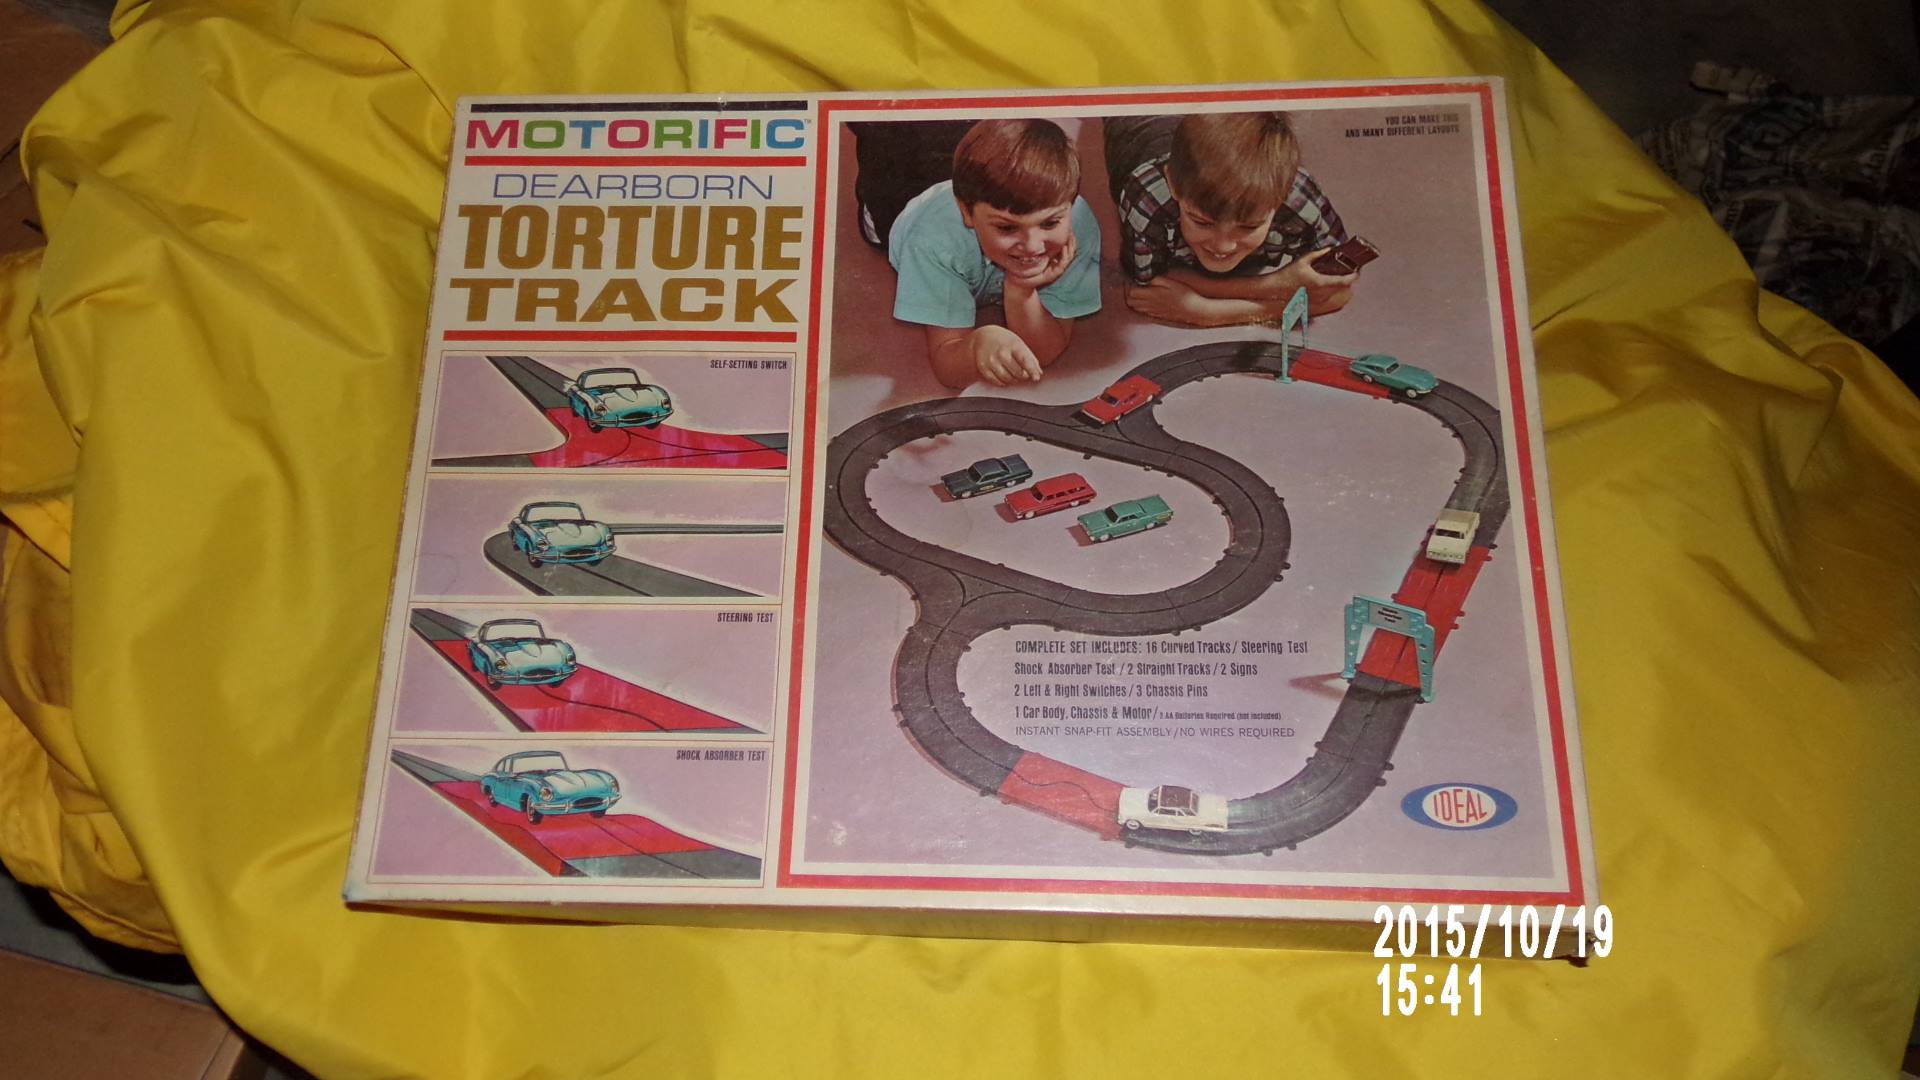 Your brothers spent hours with this but it was a boy toy so you couldn't play